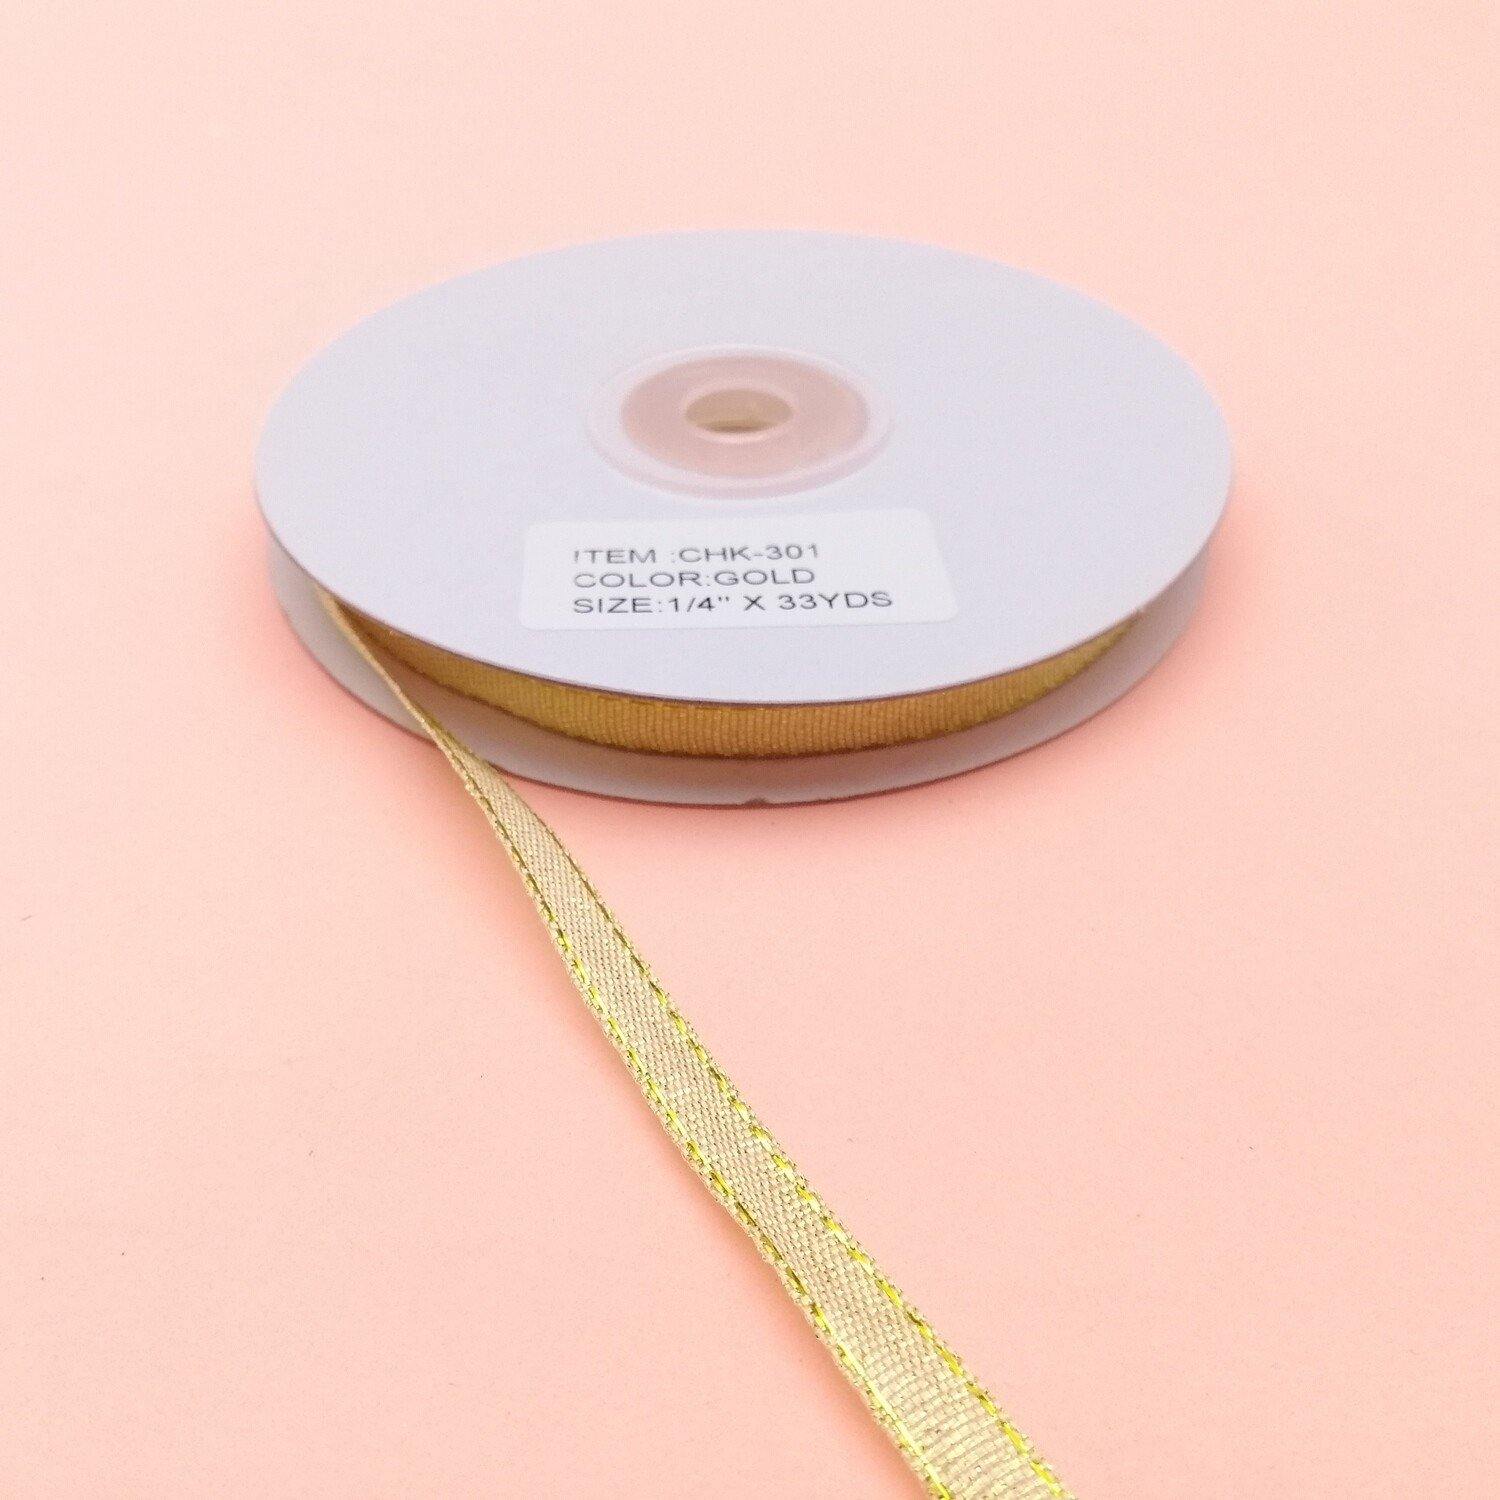 1/4" K-301 GOLD RIBBON (33YDS) - Kitchen Convenience: Ingredients & Supplies Delivery